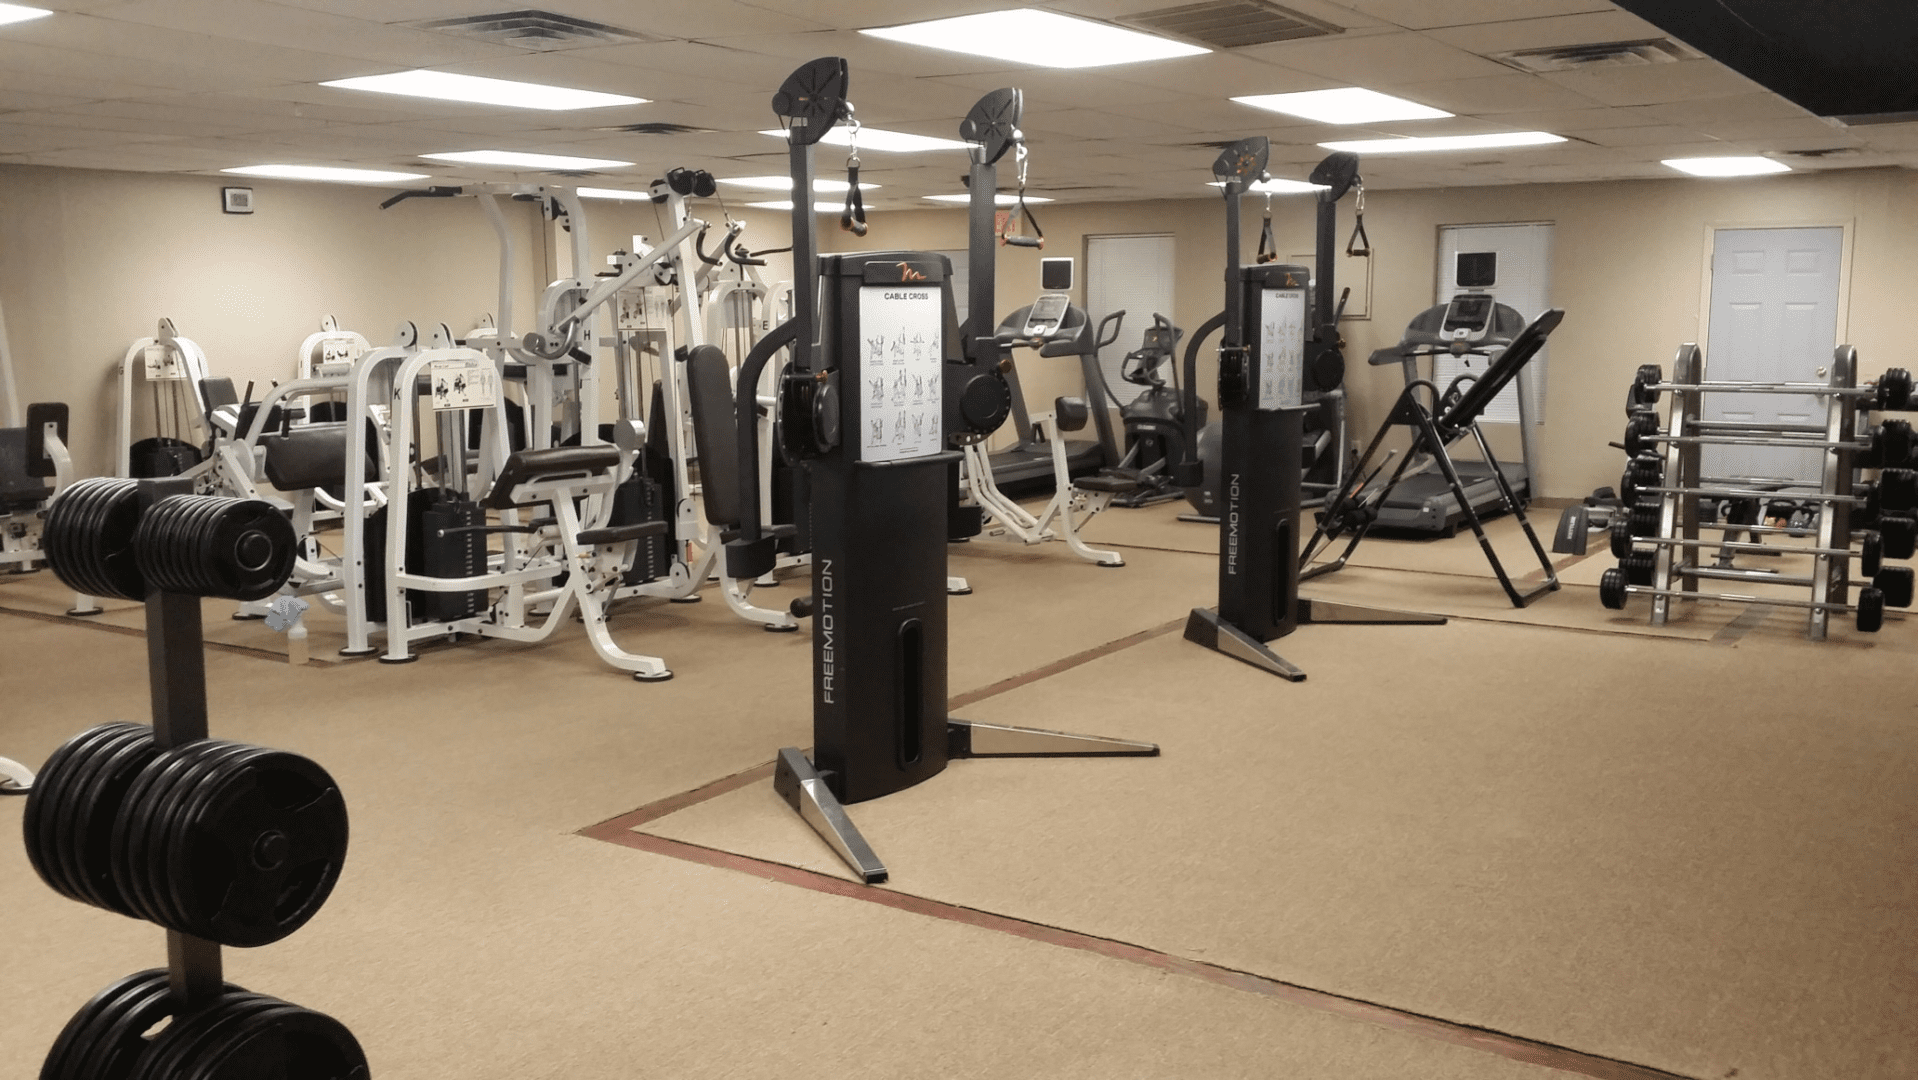 A gym with many machines and a few people